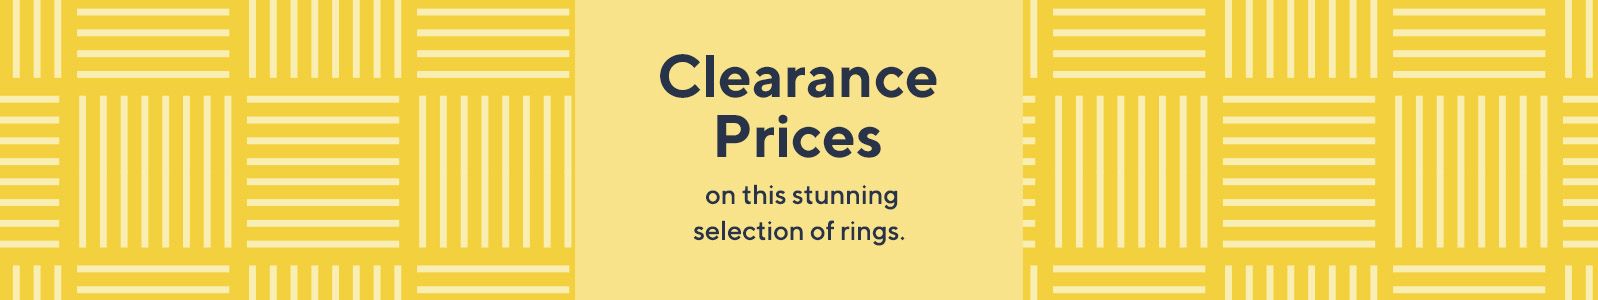 Clearance Prices on this stunning selection of rings.